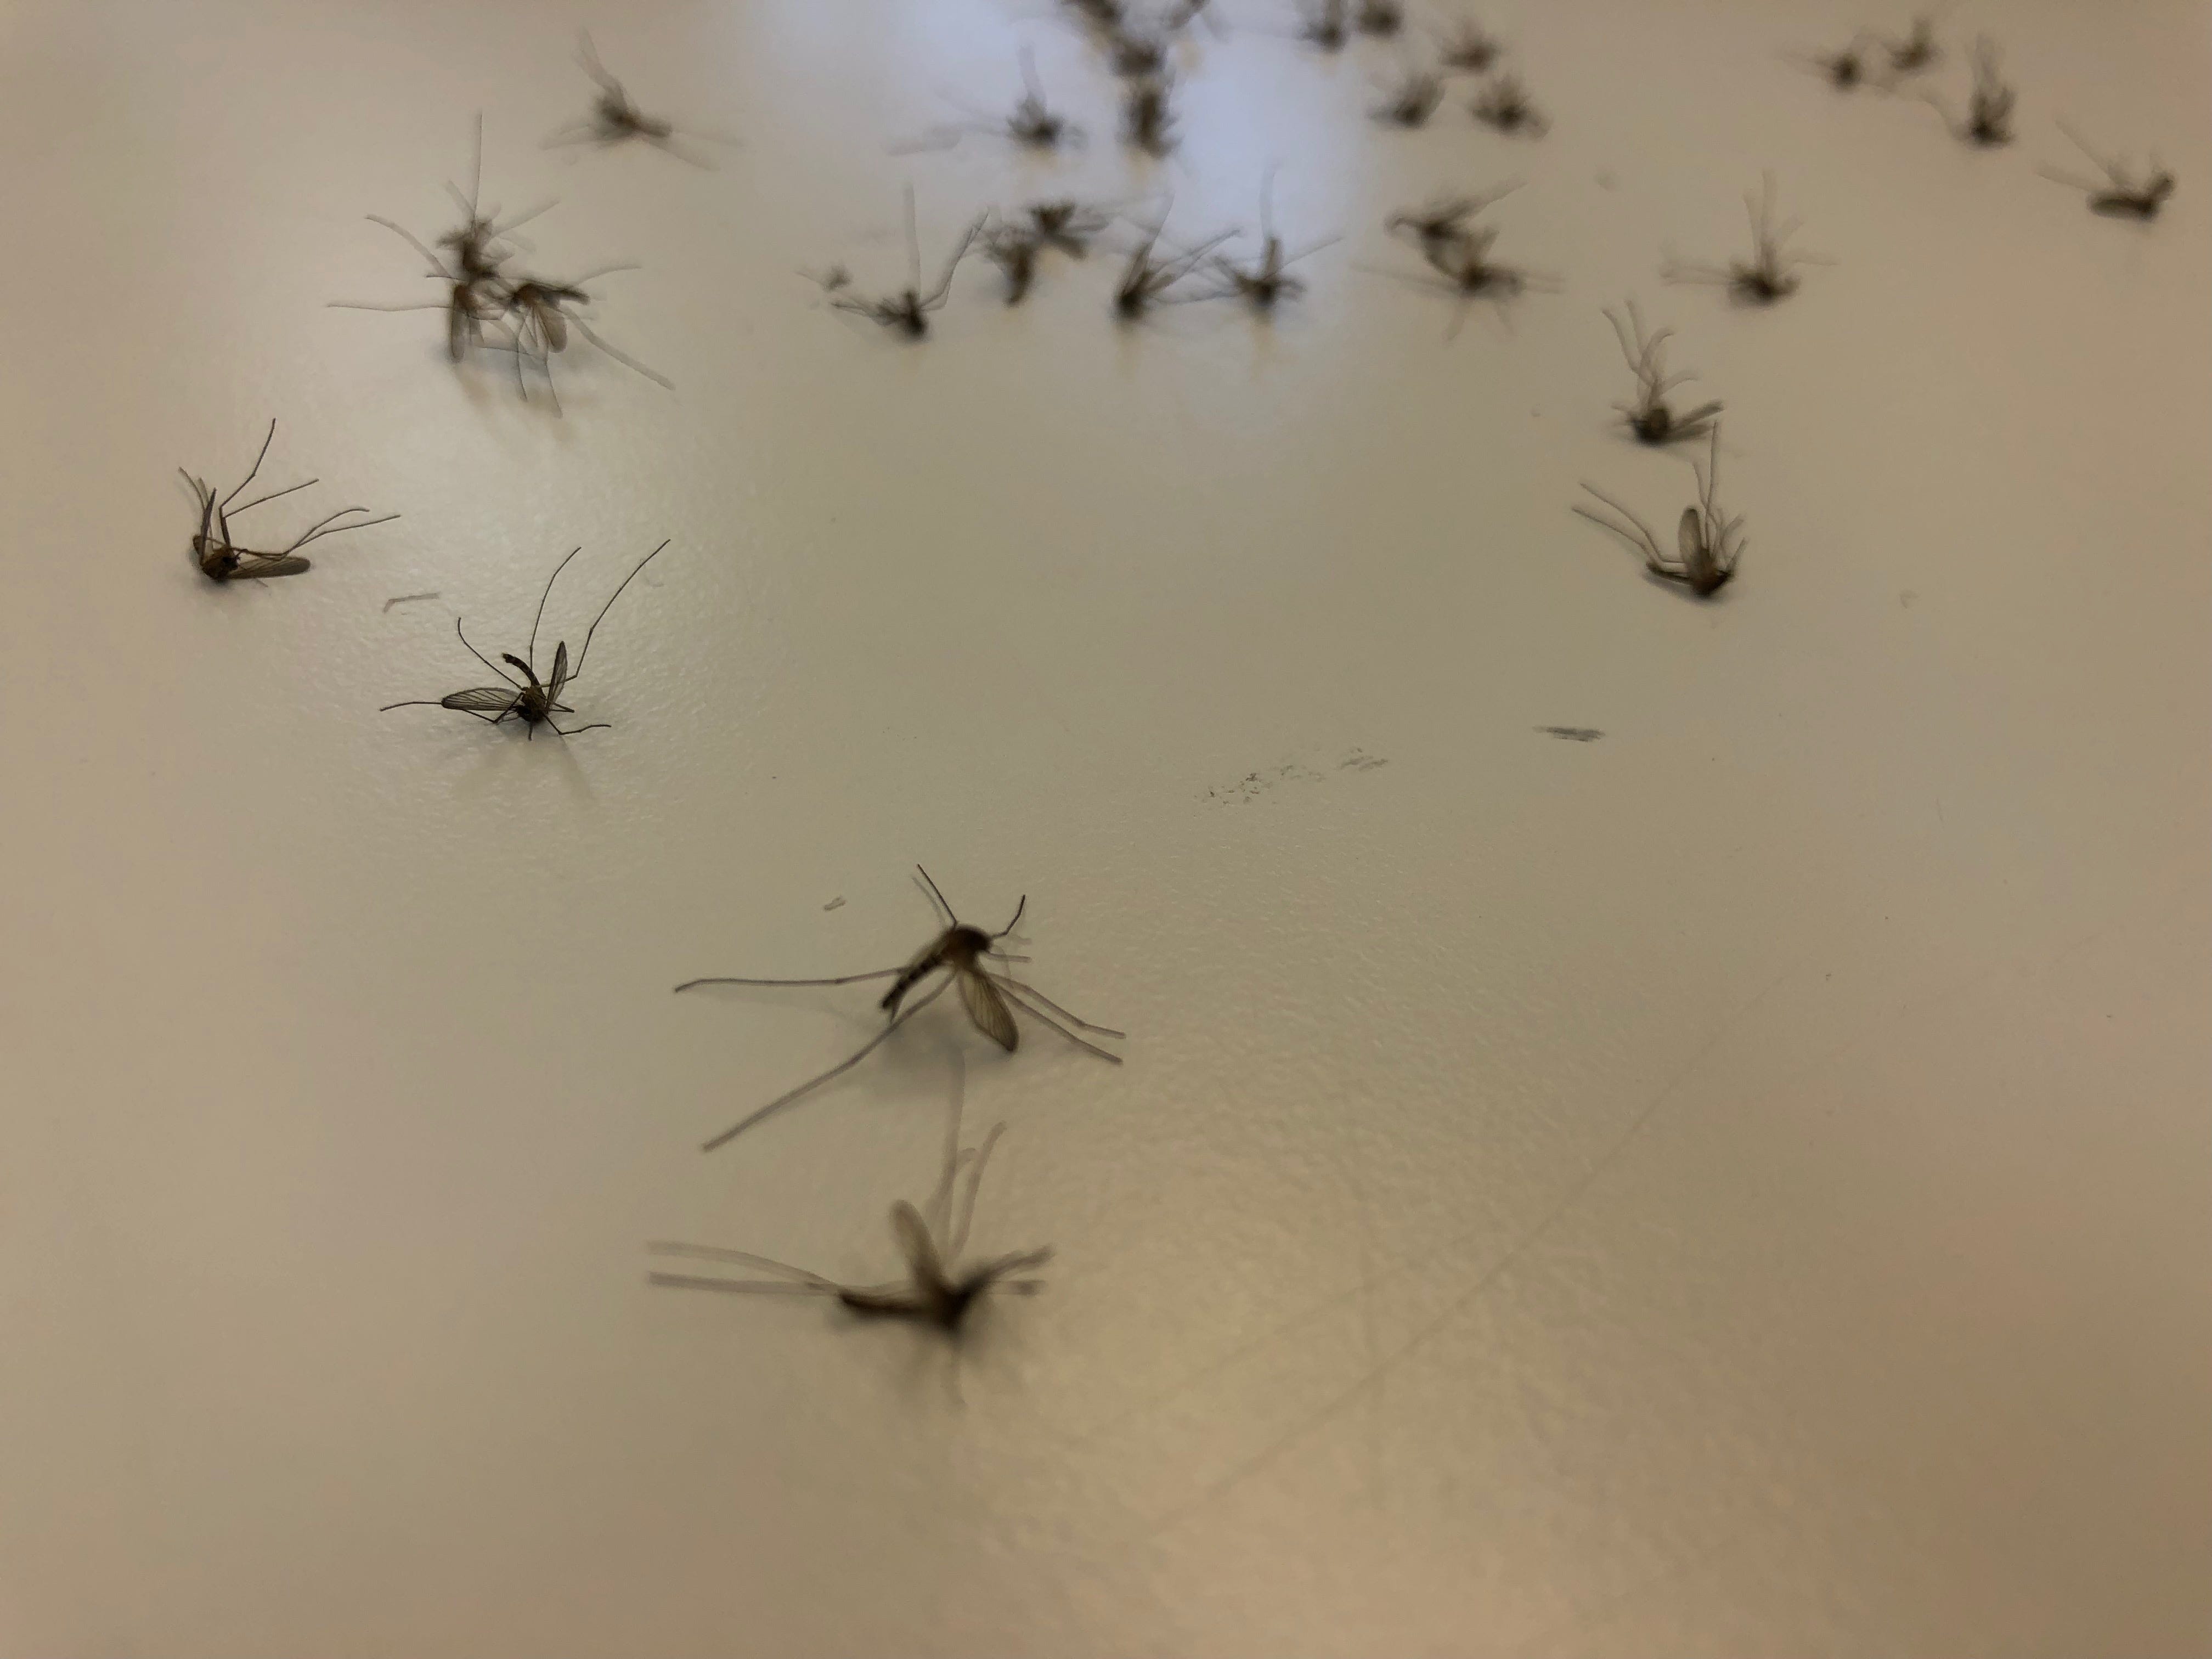 Marion County mosquitoes are back in droves after rainy spring